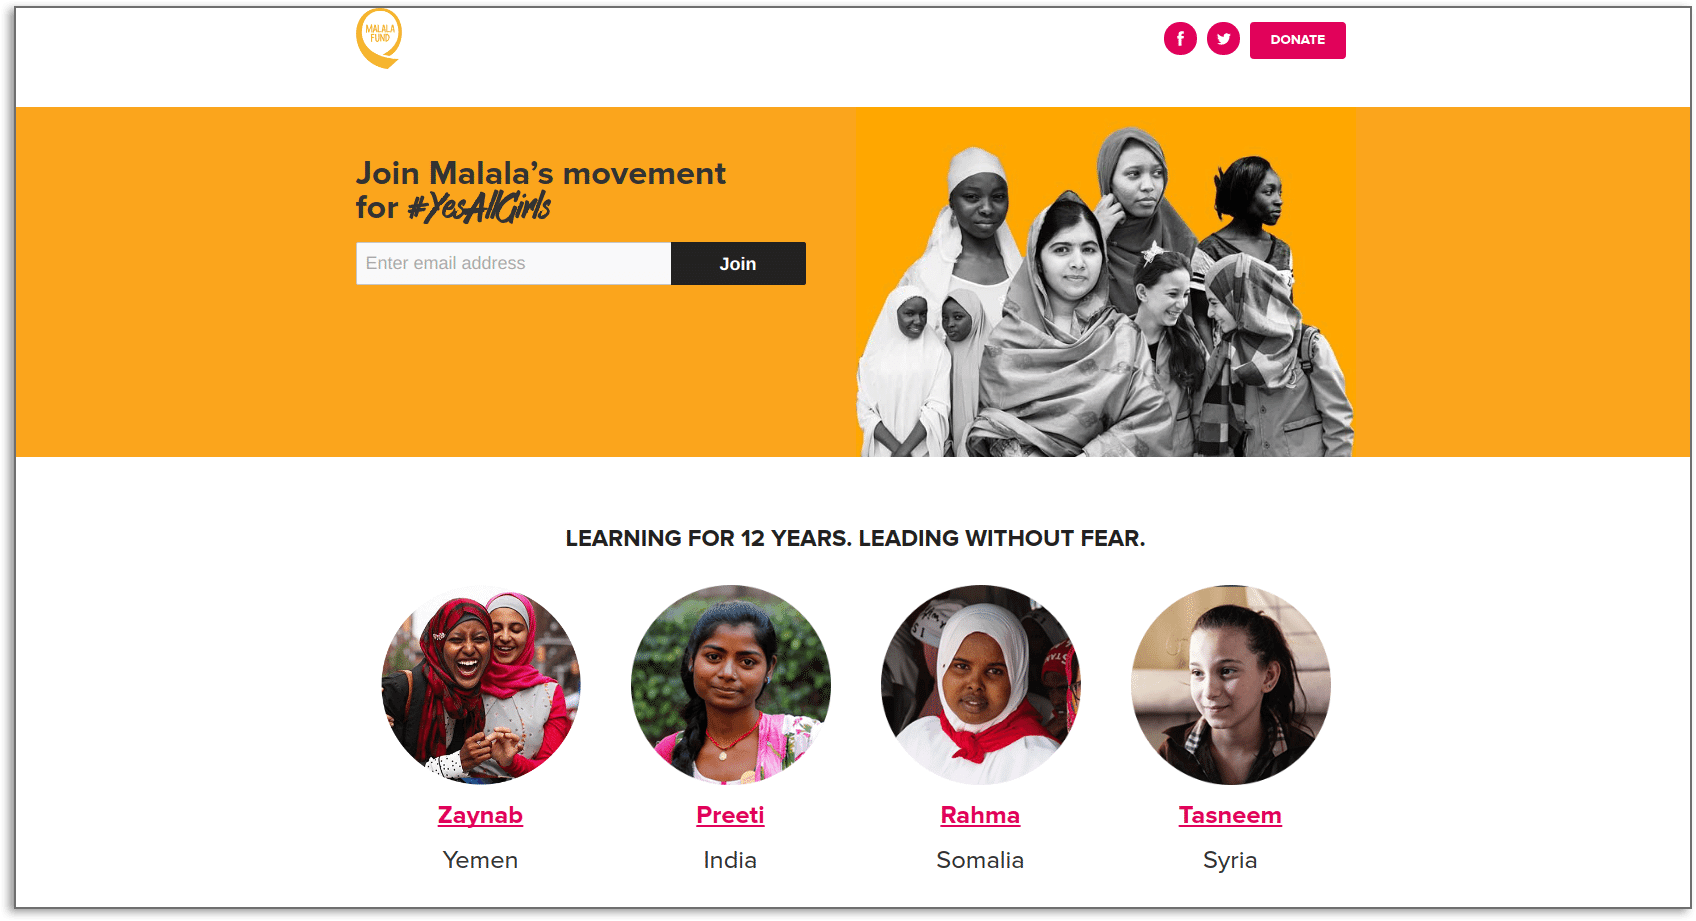 The Malala Fund's website includes tons of pictures of both their founder, Malala Yousafzai, and those they serve to add a personal touch, create visual impact, and spark an emotion response.